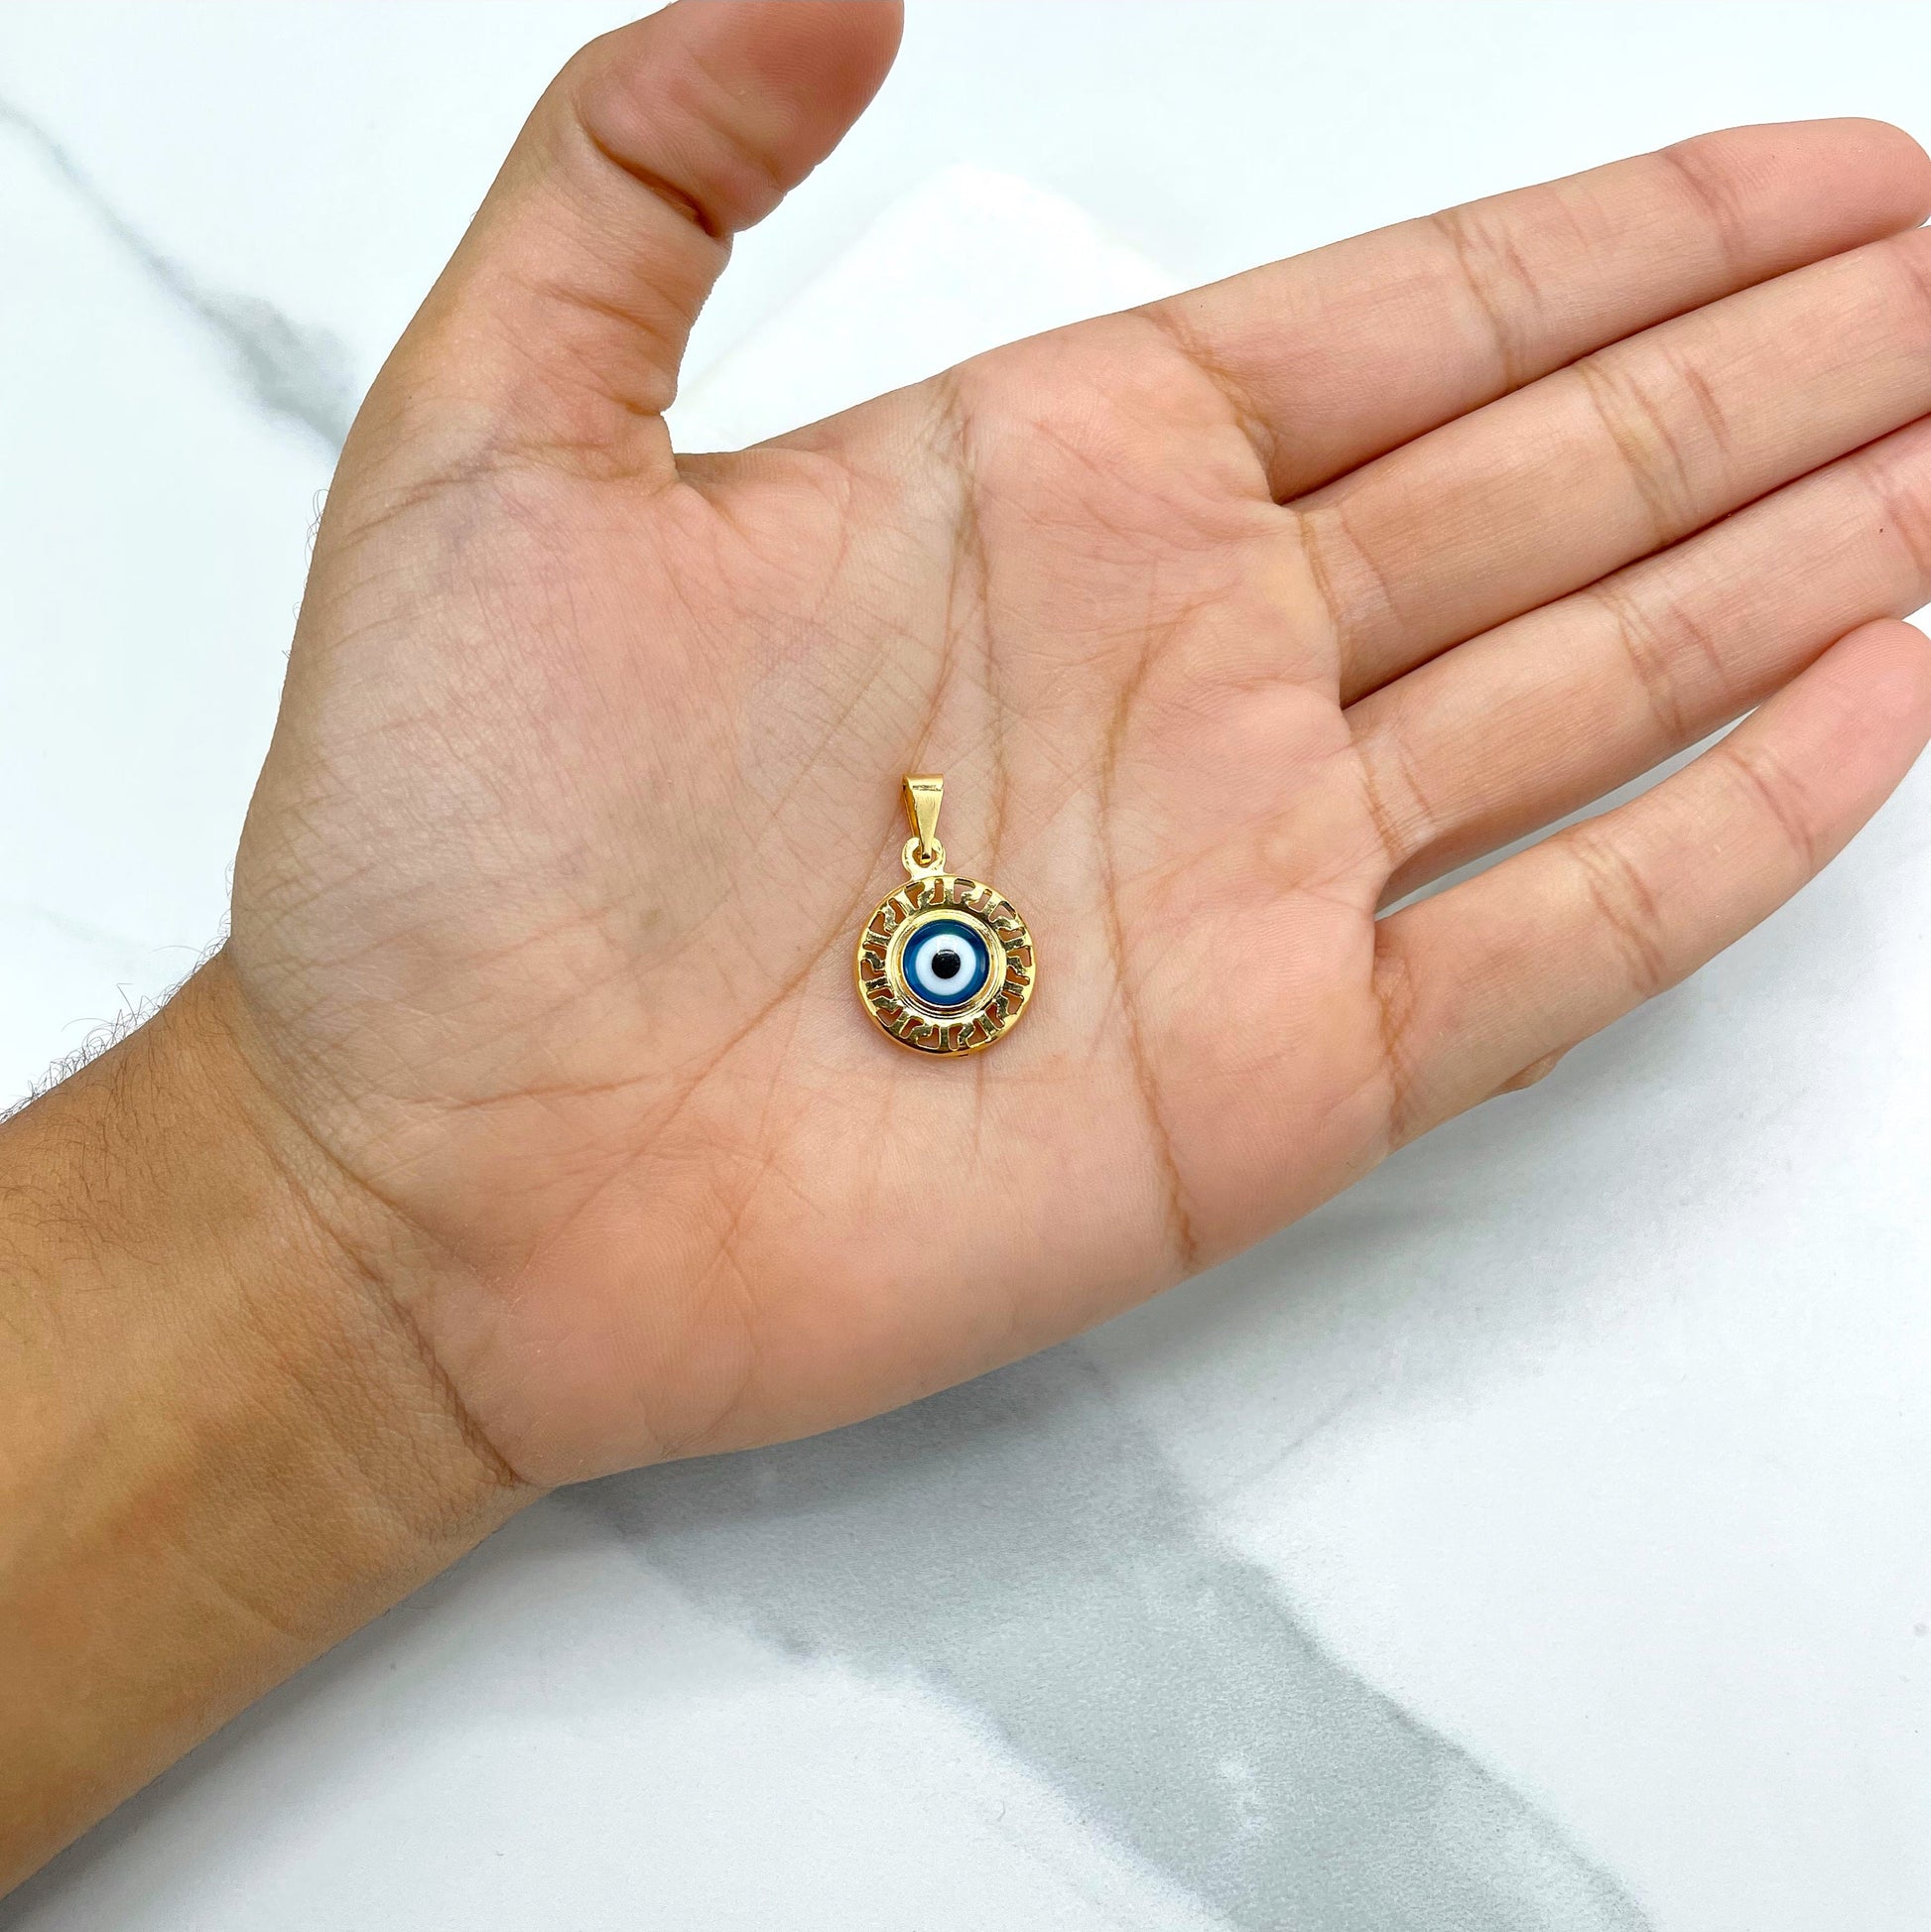 18k Gold Filled Blue Enamel Evil Eye, Greek Eye with Ethnic Details Circle Charm Pendant, Luck & Protection Coin Amulet, Wholesale Jewelry